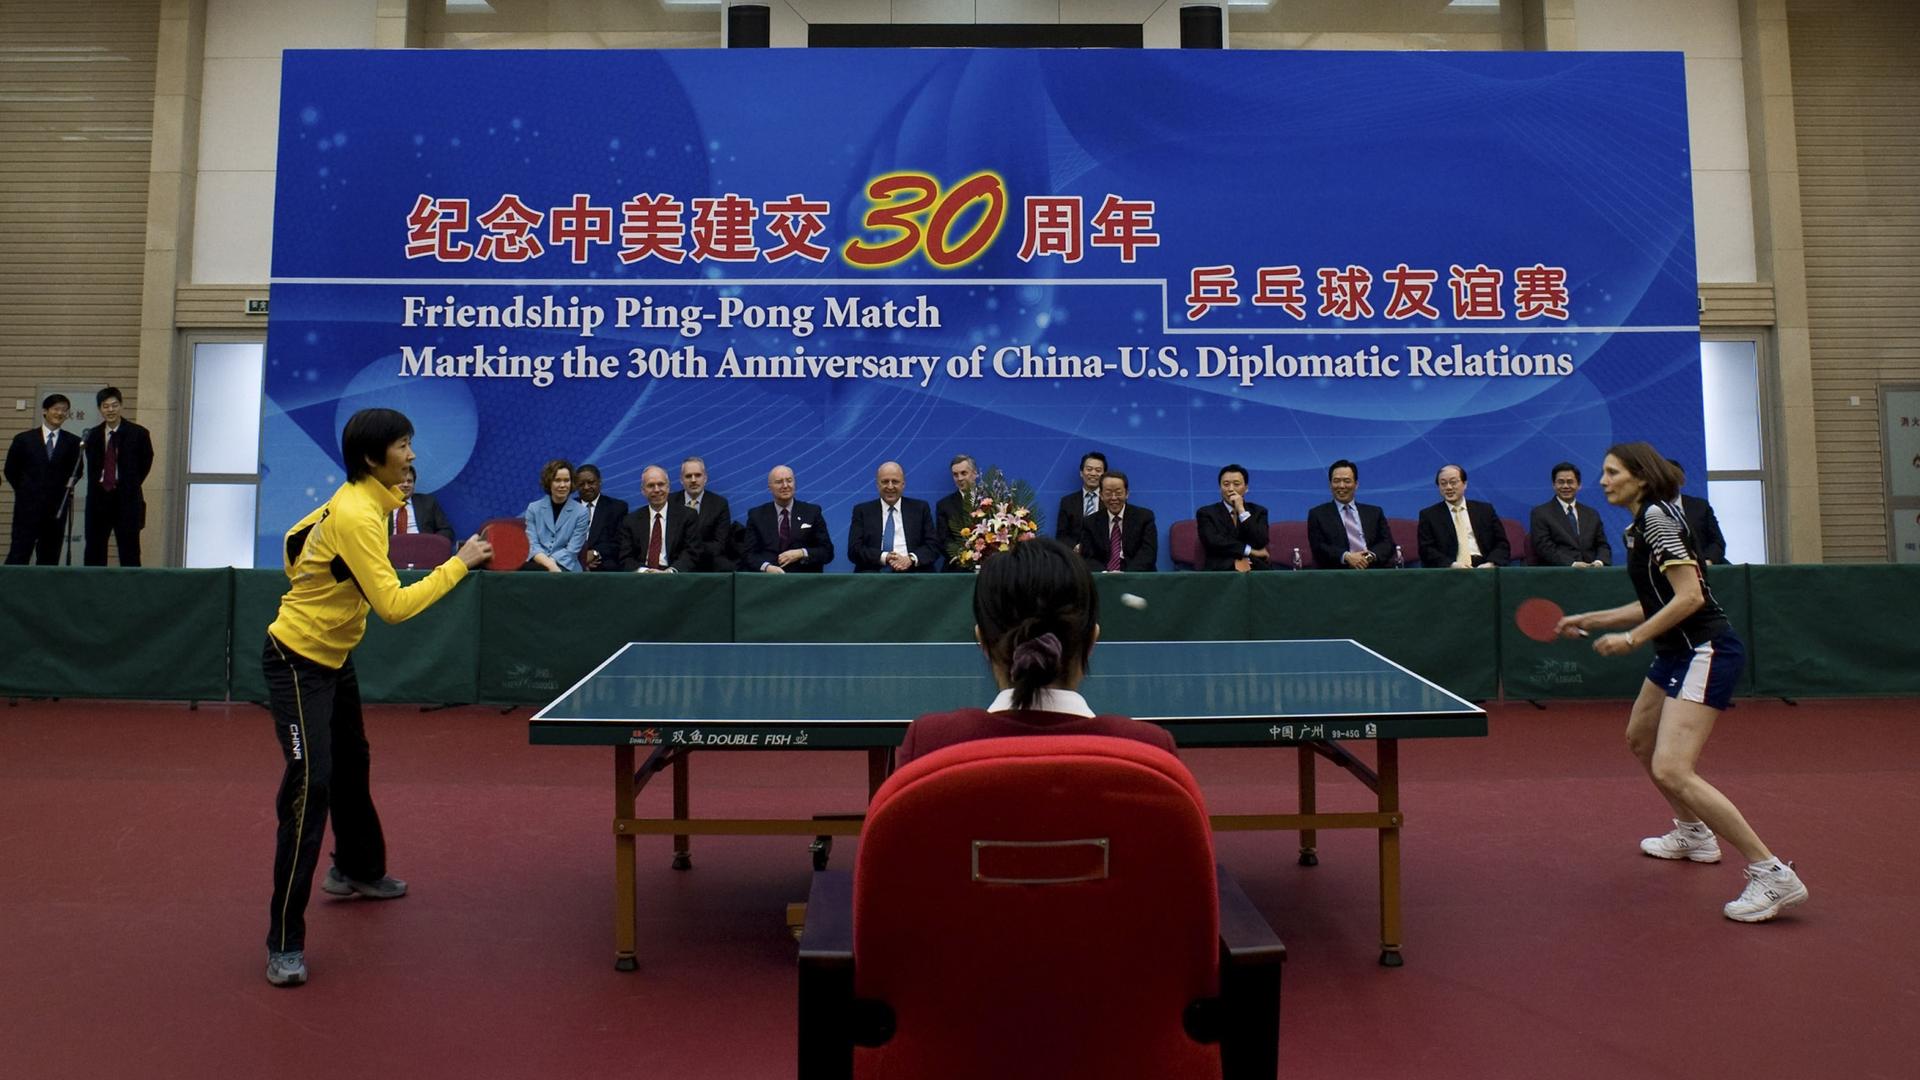 Table top tennis players compete in front of a large blue banner